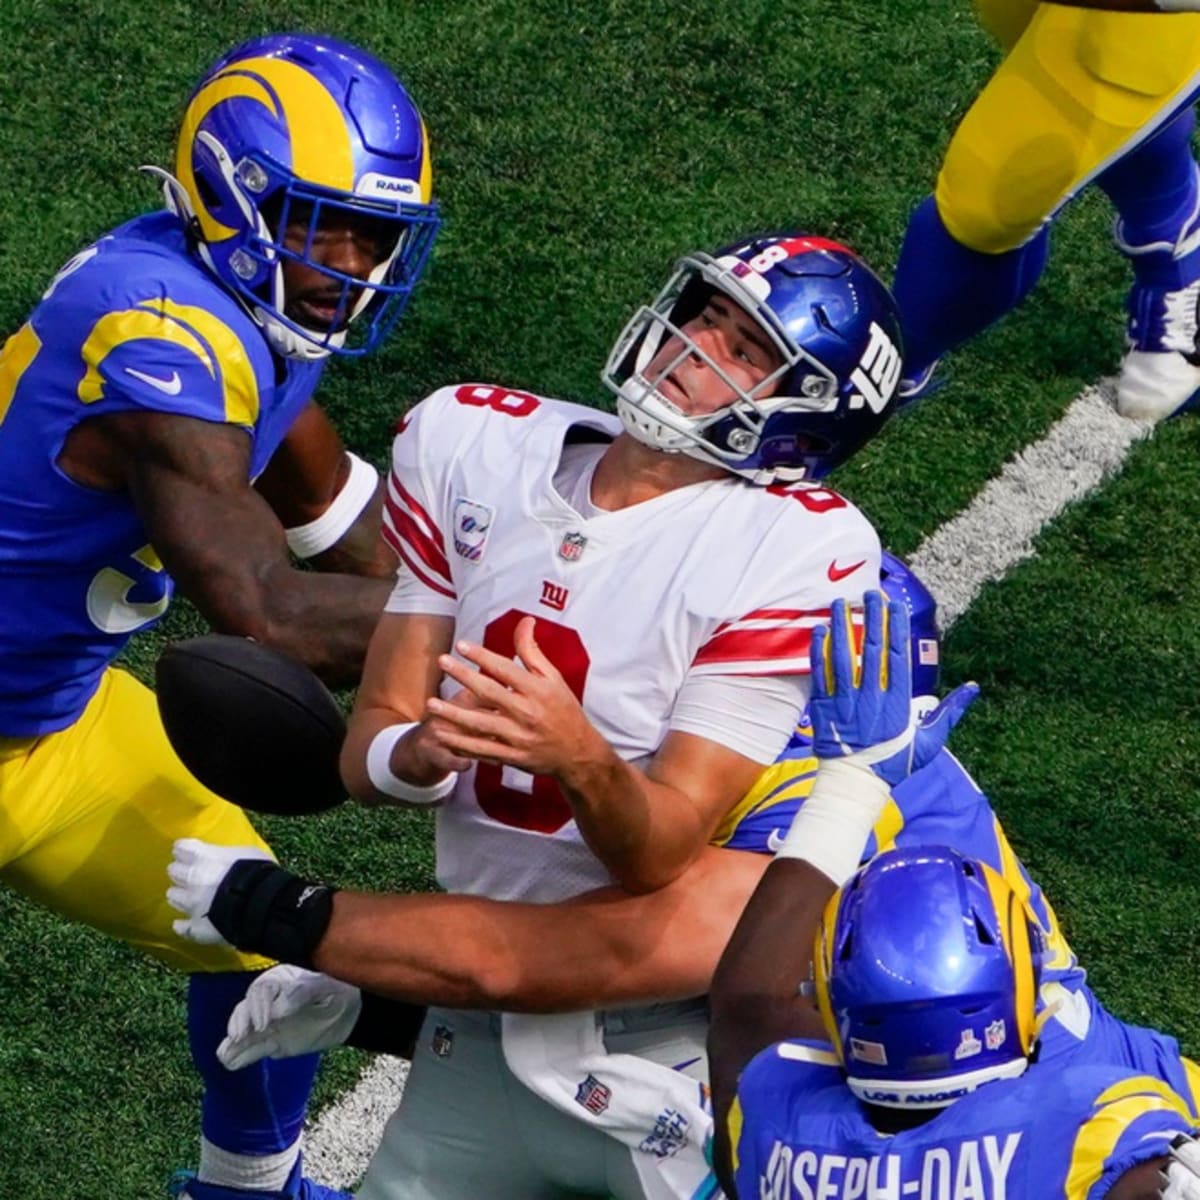 Two New York Giants suffer injuries on failed play which was